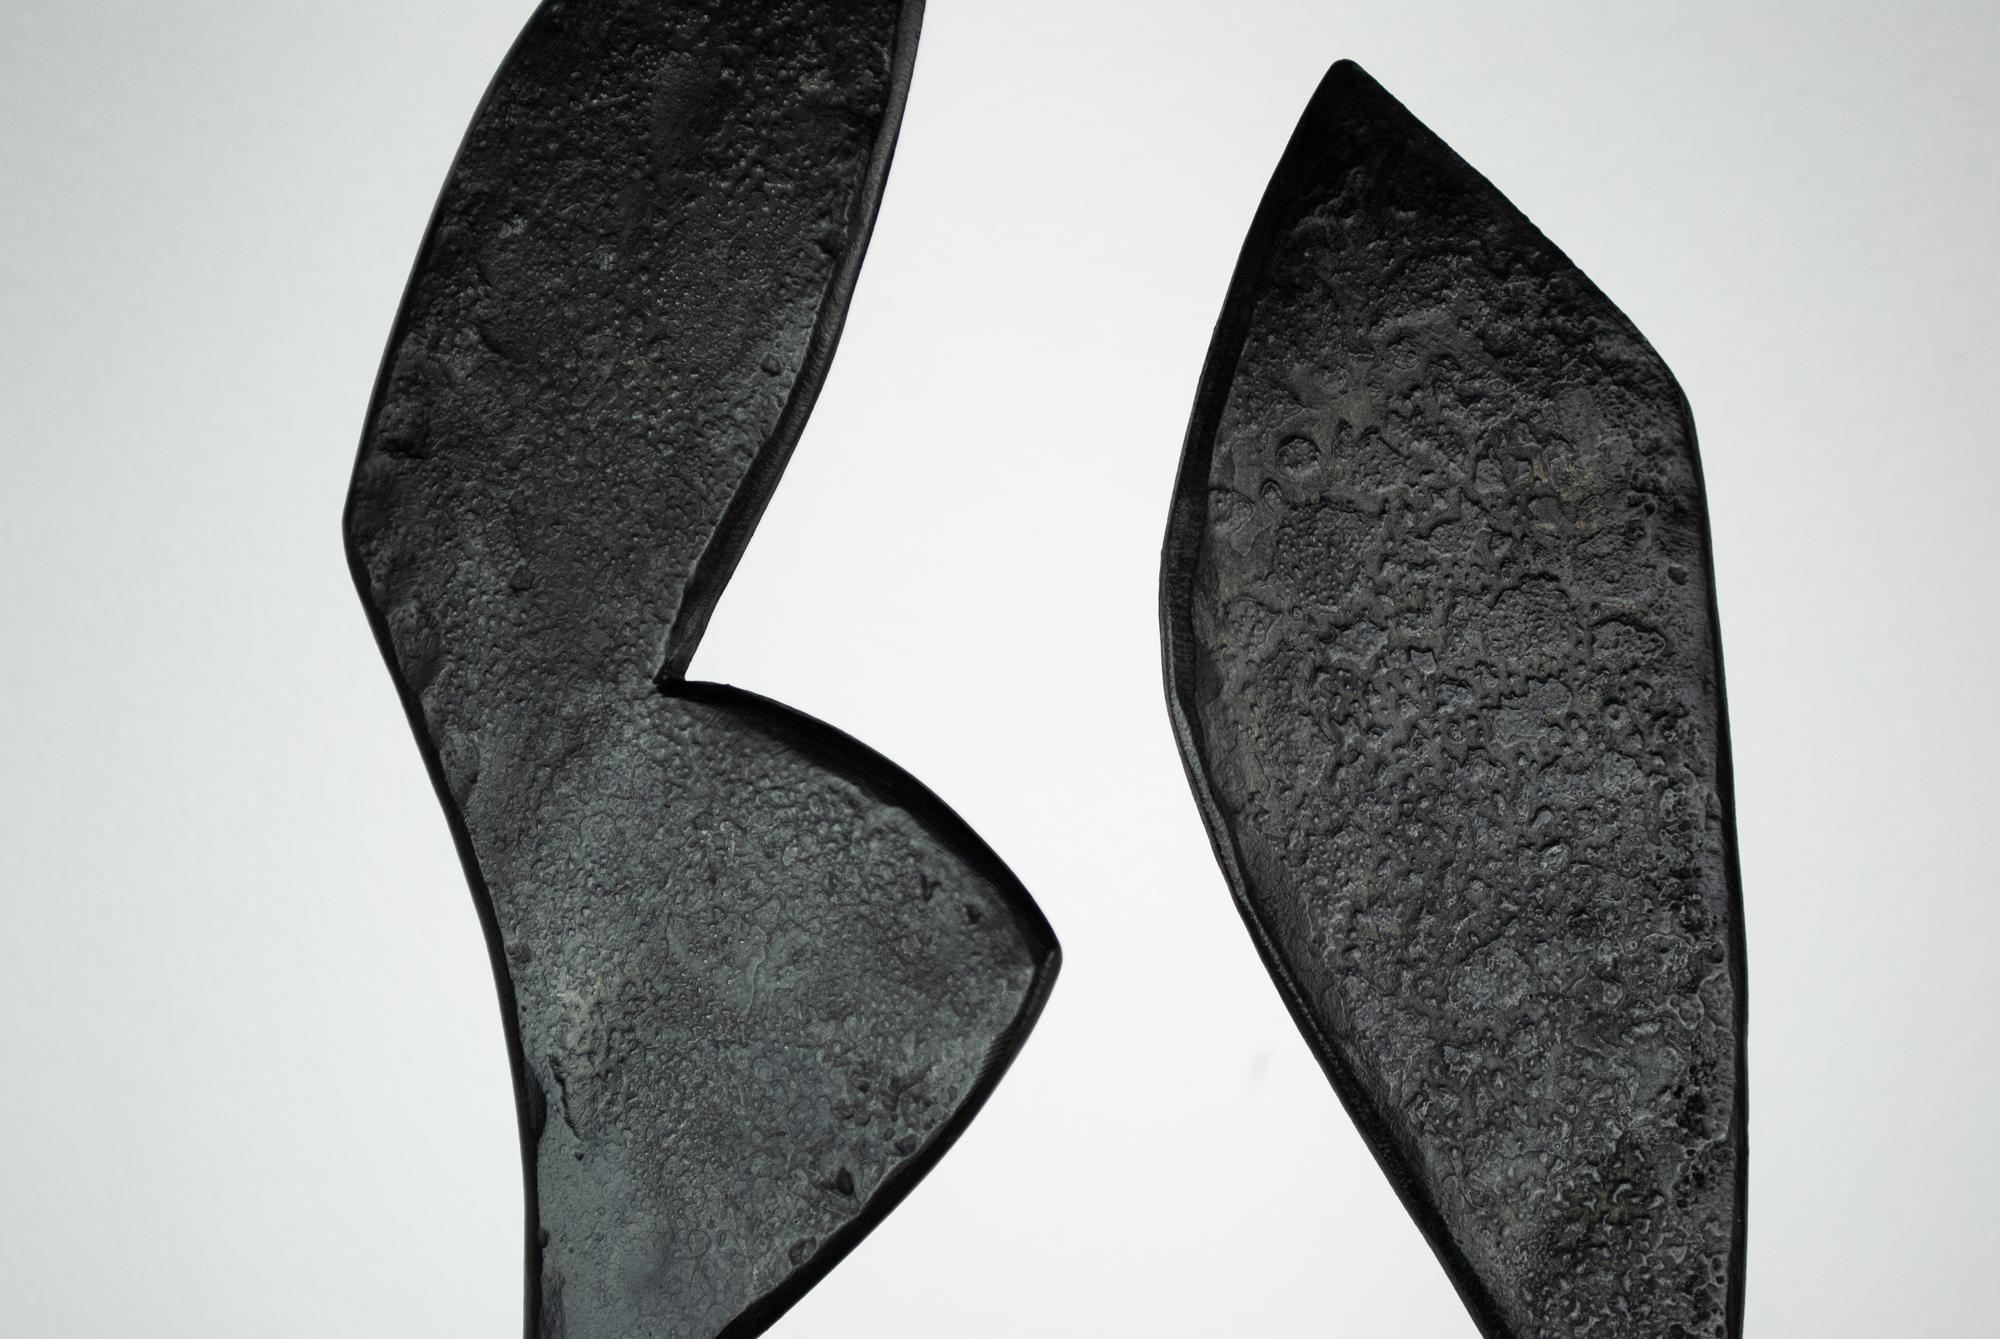 British Contemporary Black Forged Steel Sculpture Inspired by H. Bertoia - Two Forms 04 For Sale